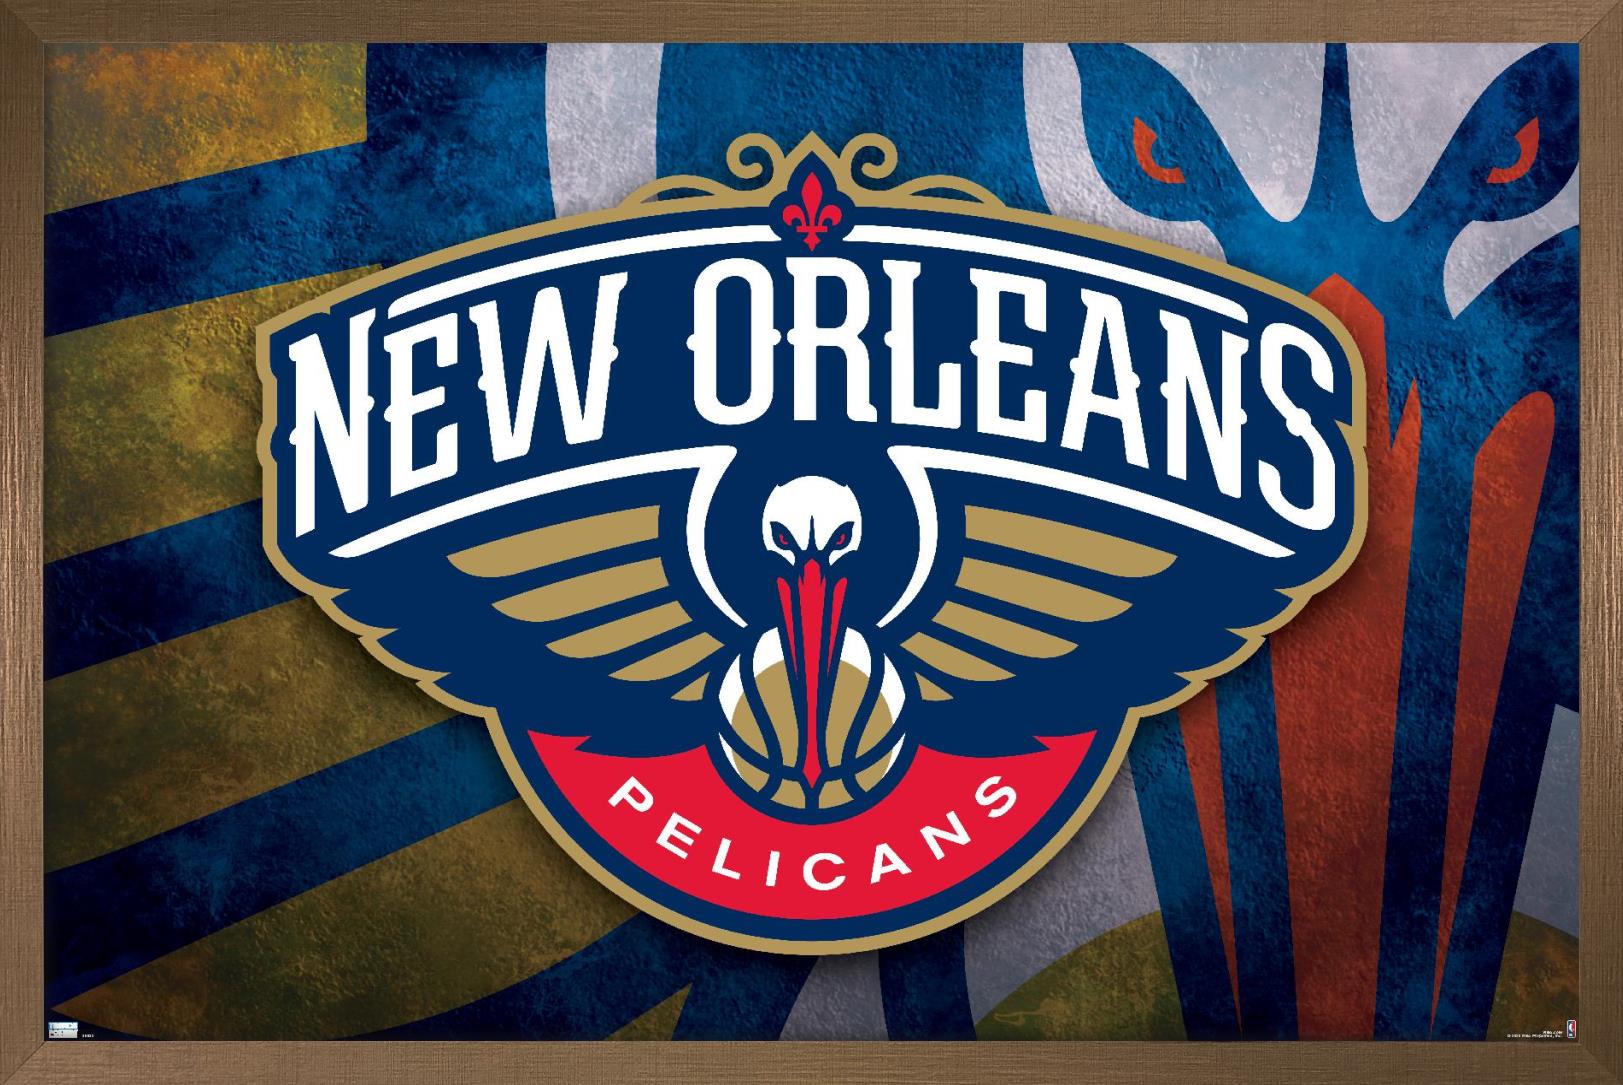 NBA New Orleans Pelicans - Logo 20 Wall Poster, 14.725" x 22.375", Framed - image 1 of 5